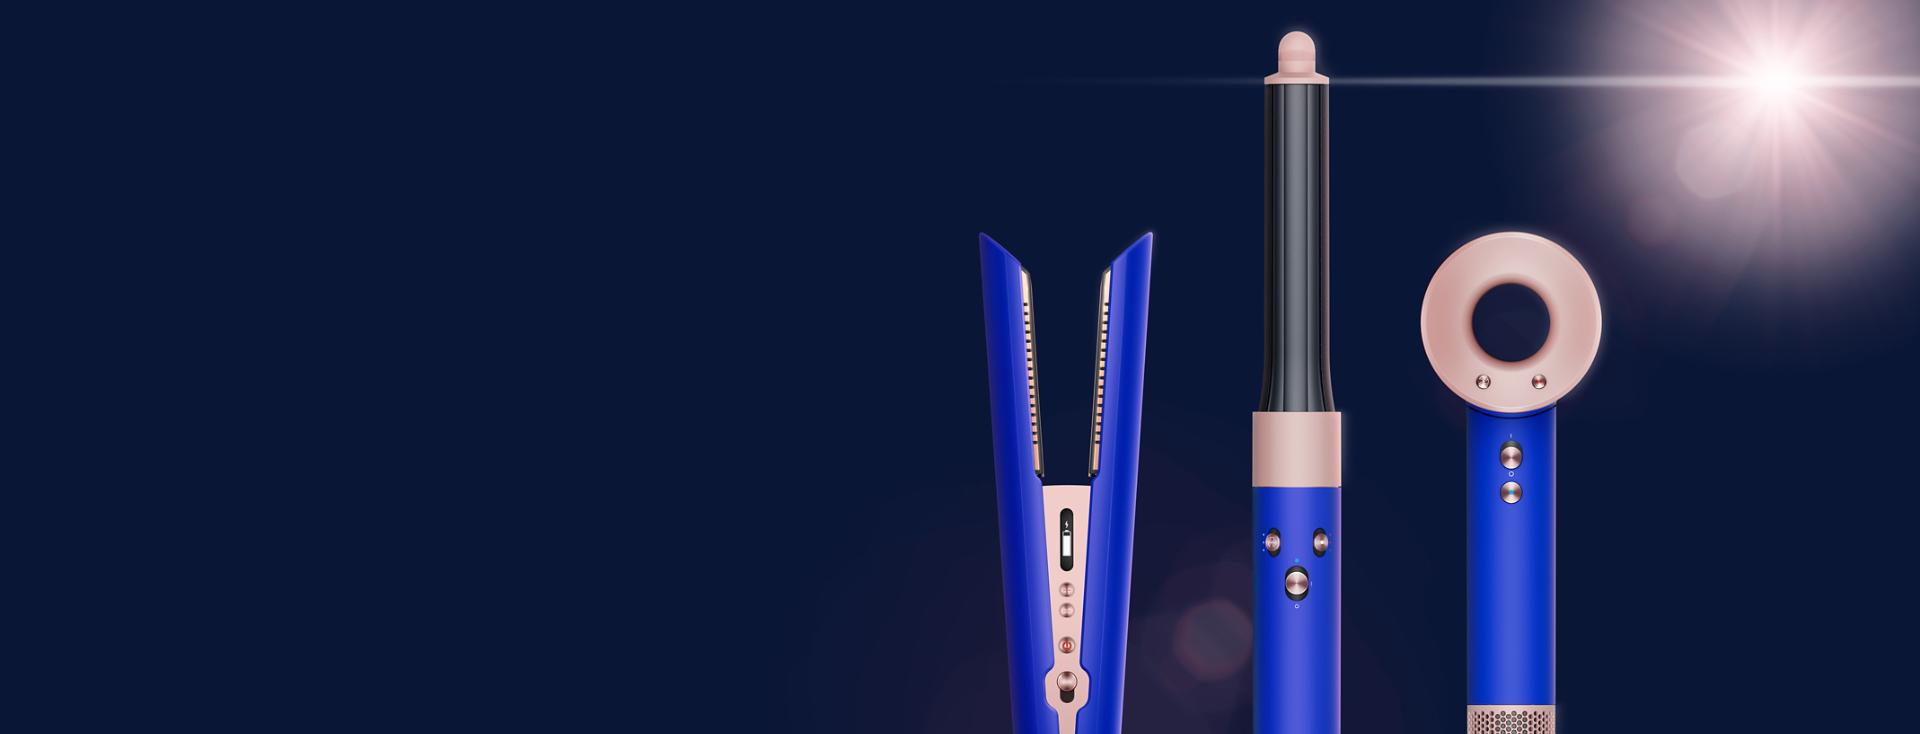 Dyson hair care machines in special edition Blue Blush